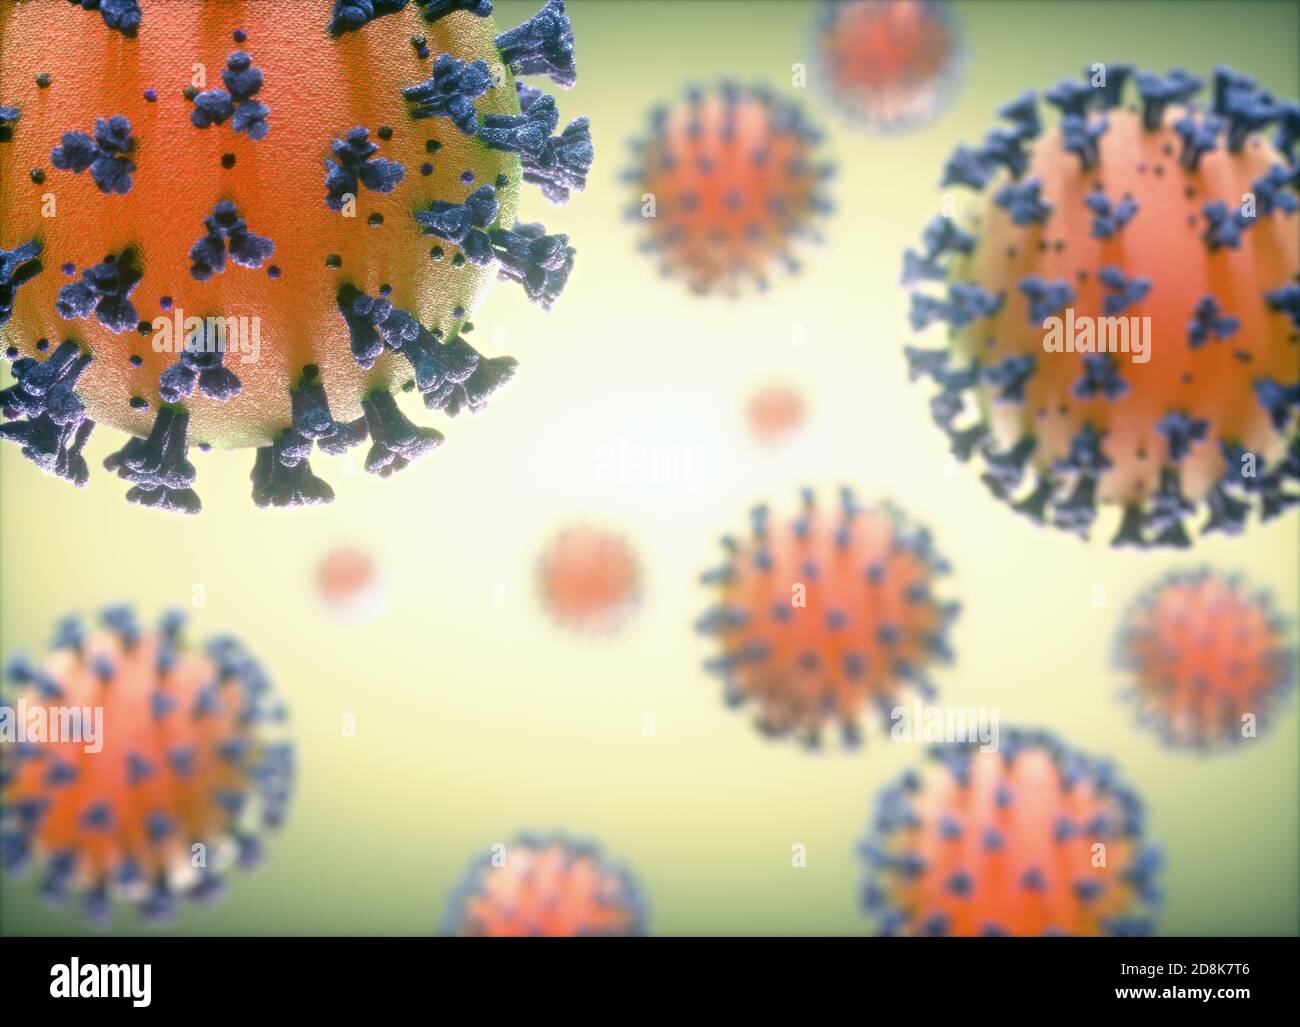 Covid-19 coronavirus particles, illustration. The new coronavirus SARS-CoV-2 (previously 2019-CoV) emerged in Wuhan, China, in December 2019. The virus causes a mild respiratory illness (Covid-19) that can develop into pneumonia and be fatal in some cases. The coronaviruses take their name from Stock Photo